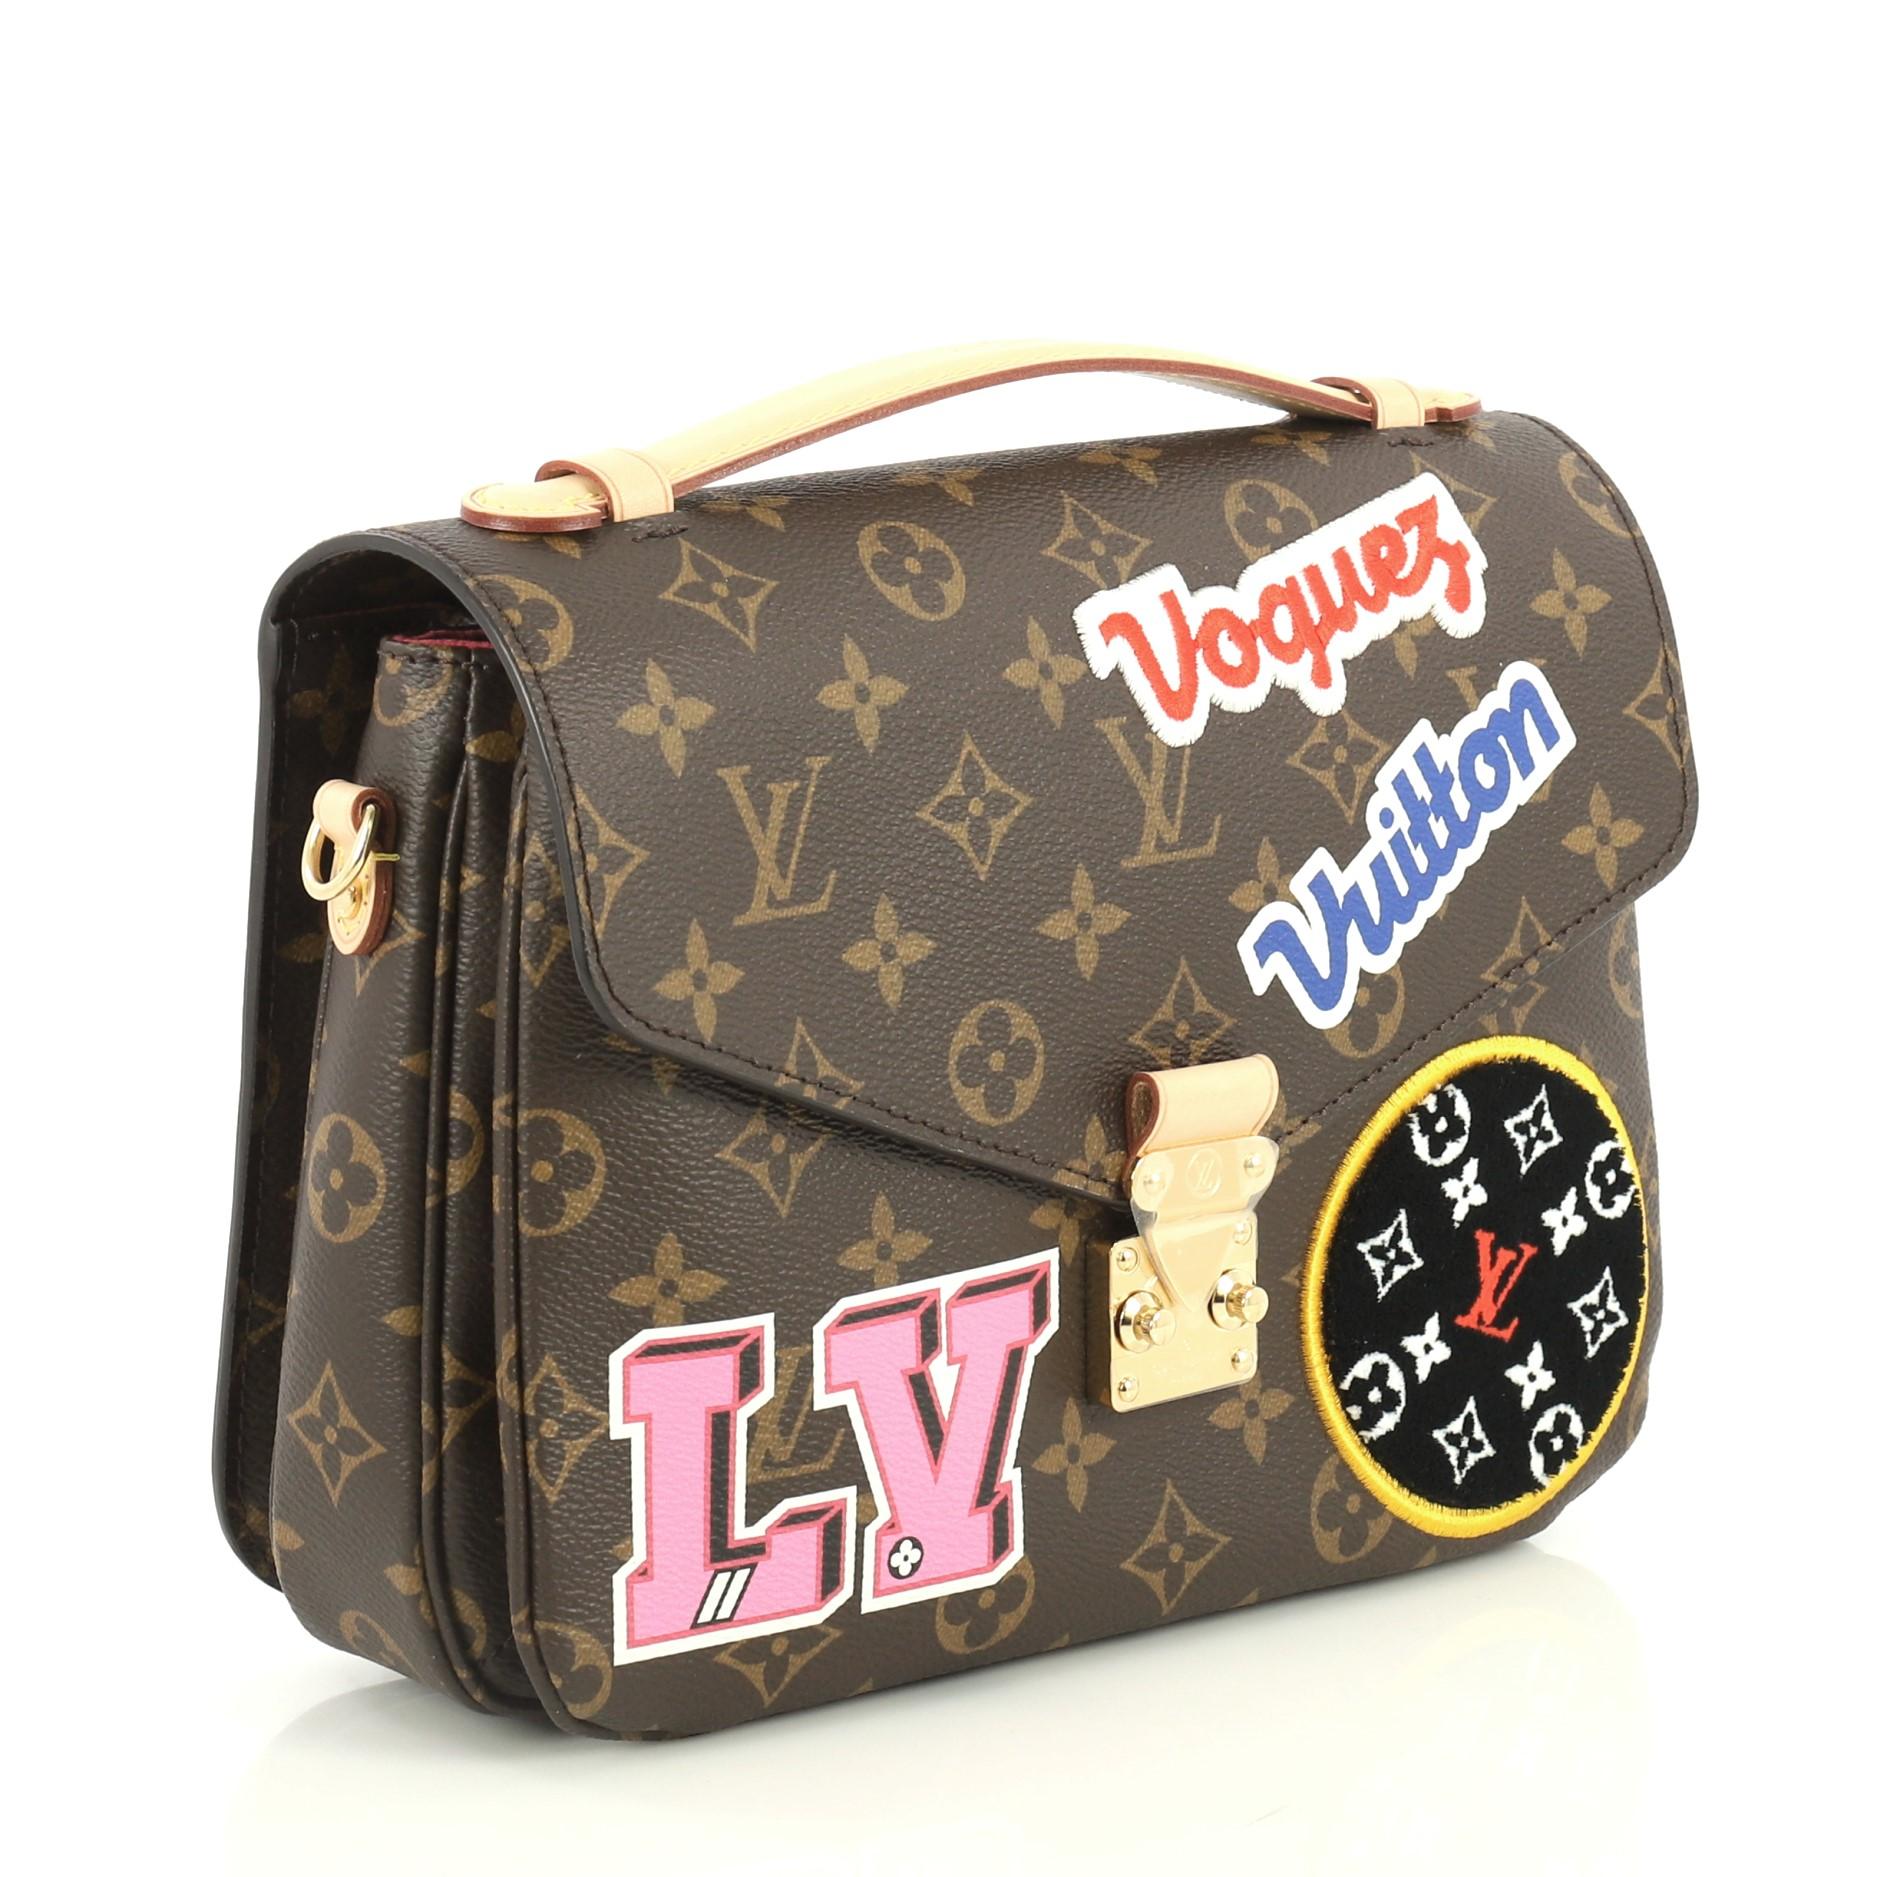 This Louis Vuitton Pochette Metis Limited Edition Patches Monogram Canvas, crafted in brown monogram coated canvas, features a leather top handle, exterior back zip pocket, patches design and gold-tone hardware. Its S-lock closure opens to a pink